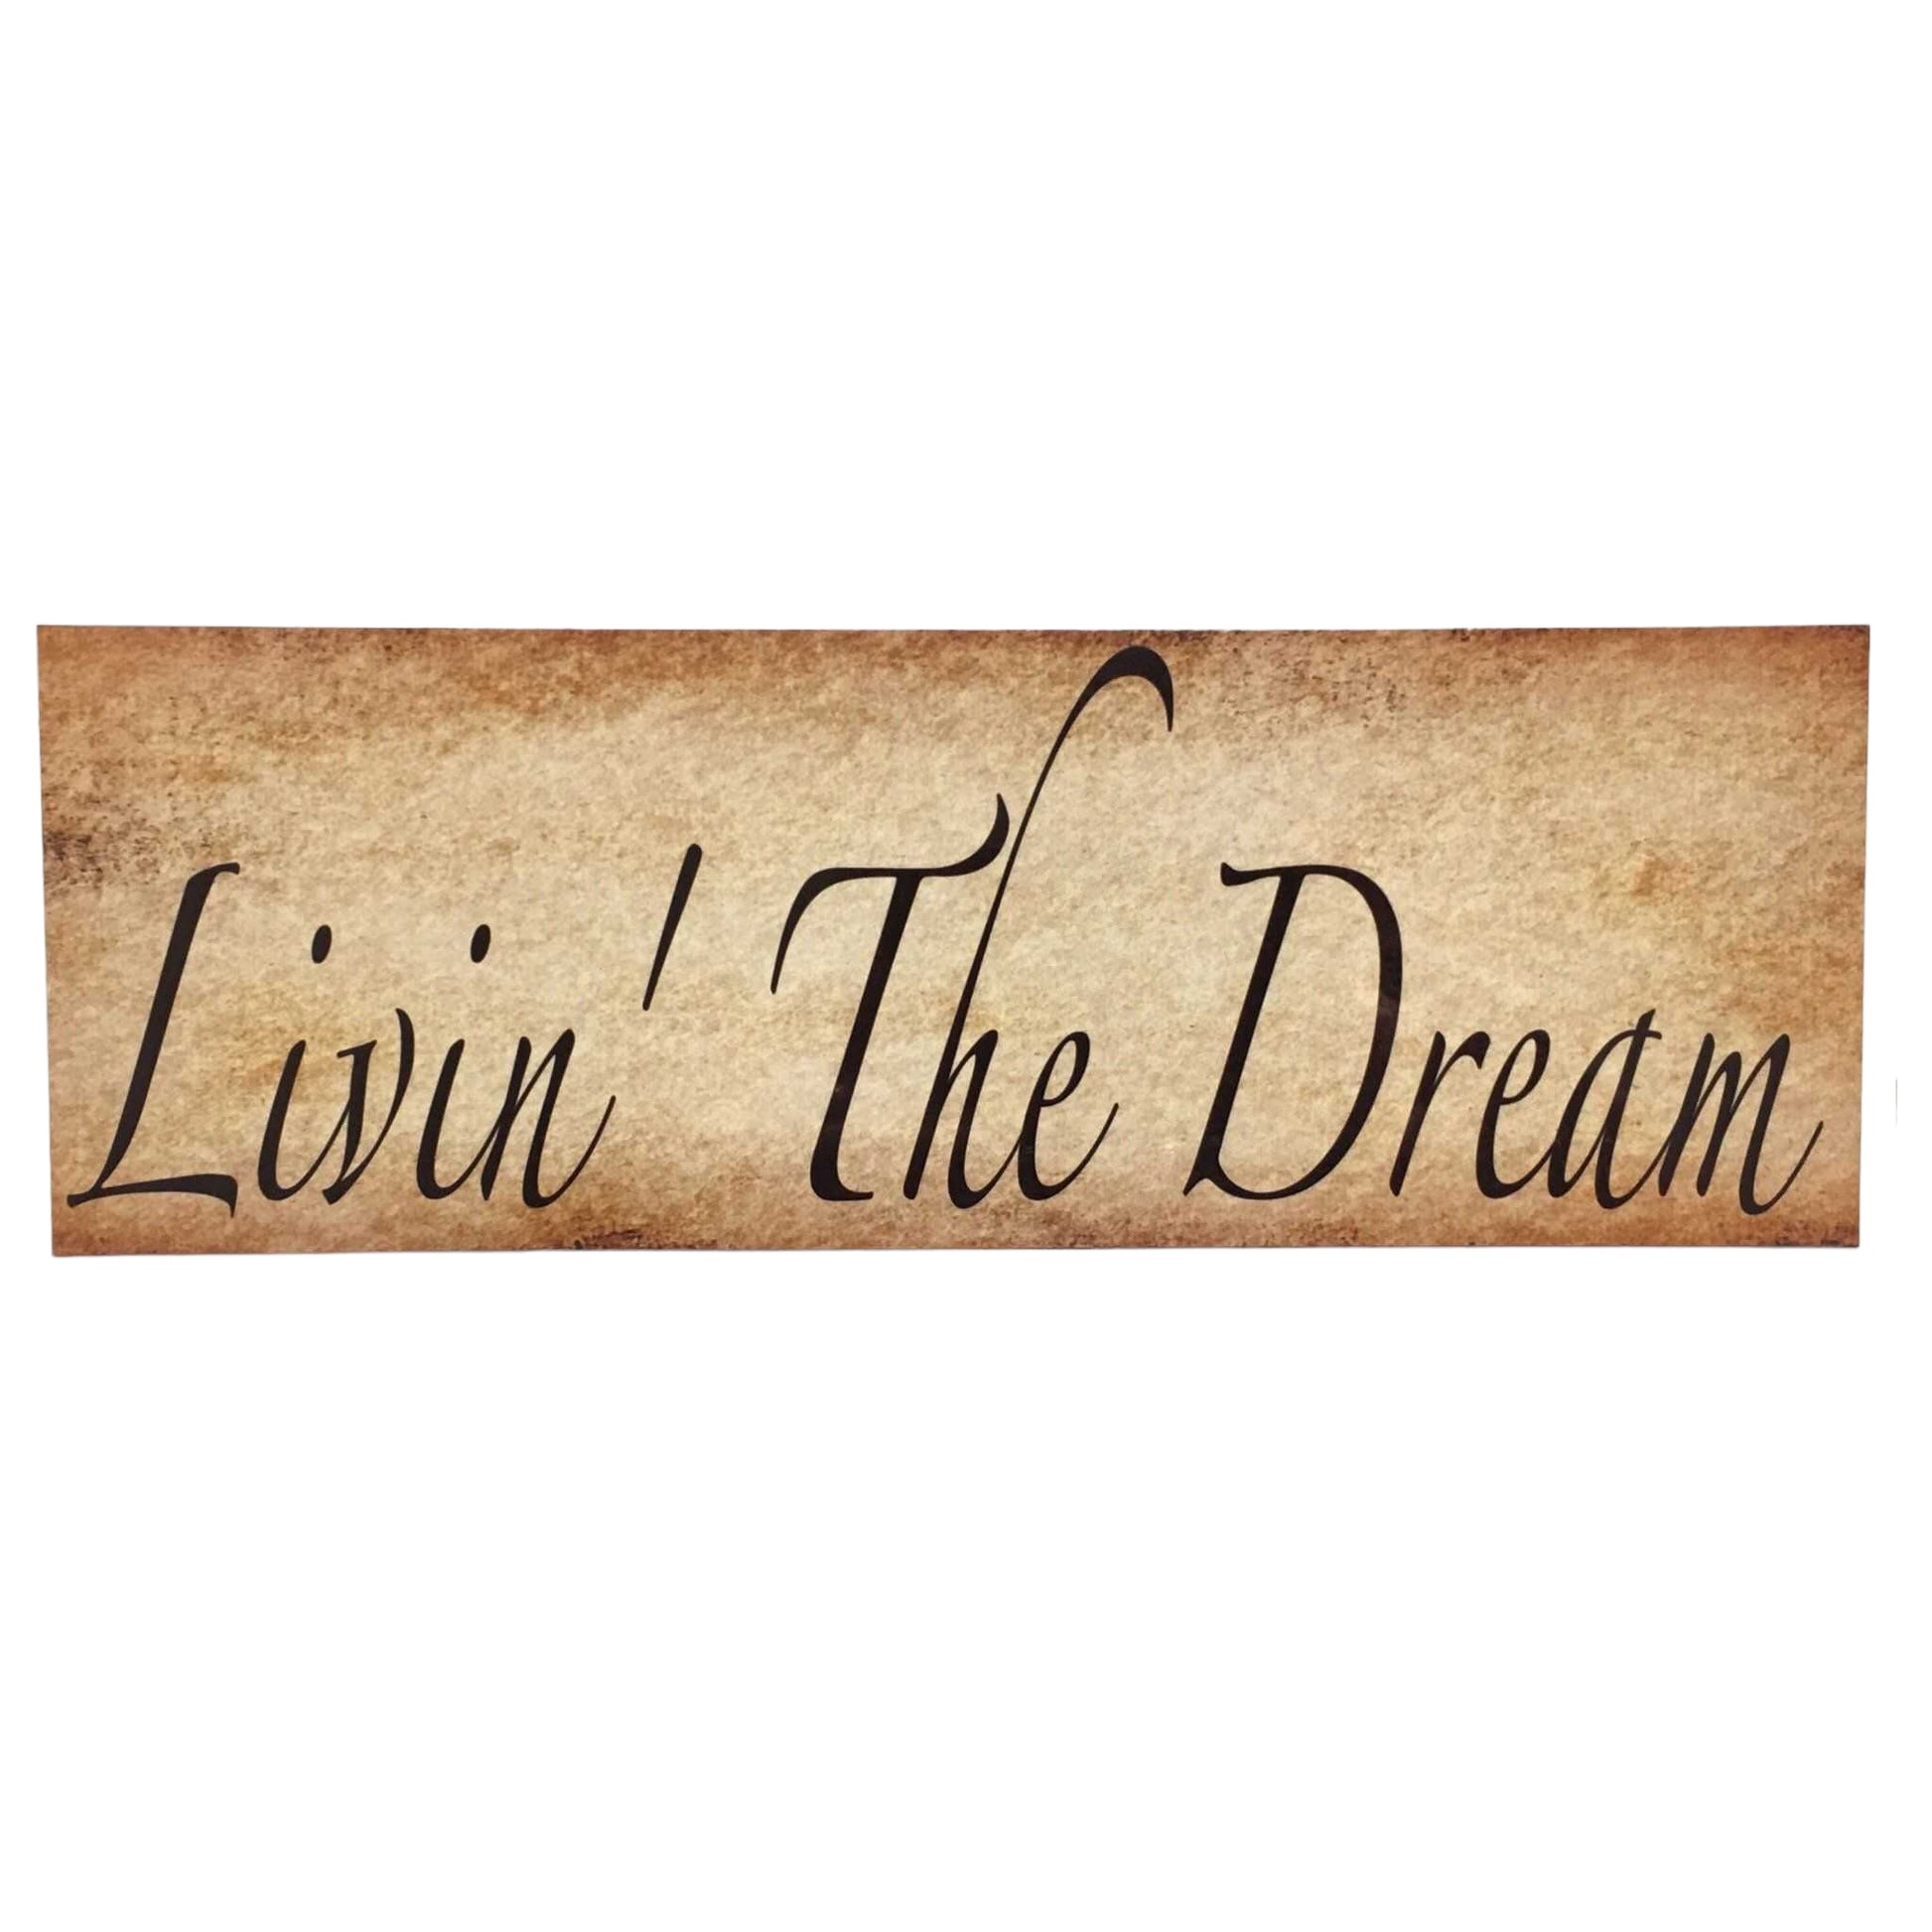 Livin The Dream - The Renmy Store Homewares & Gifts 